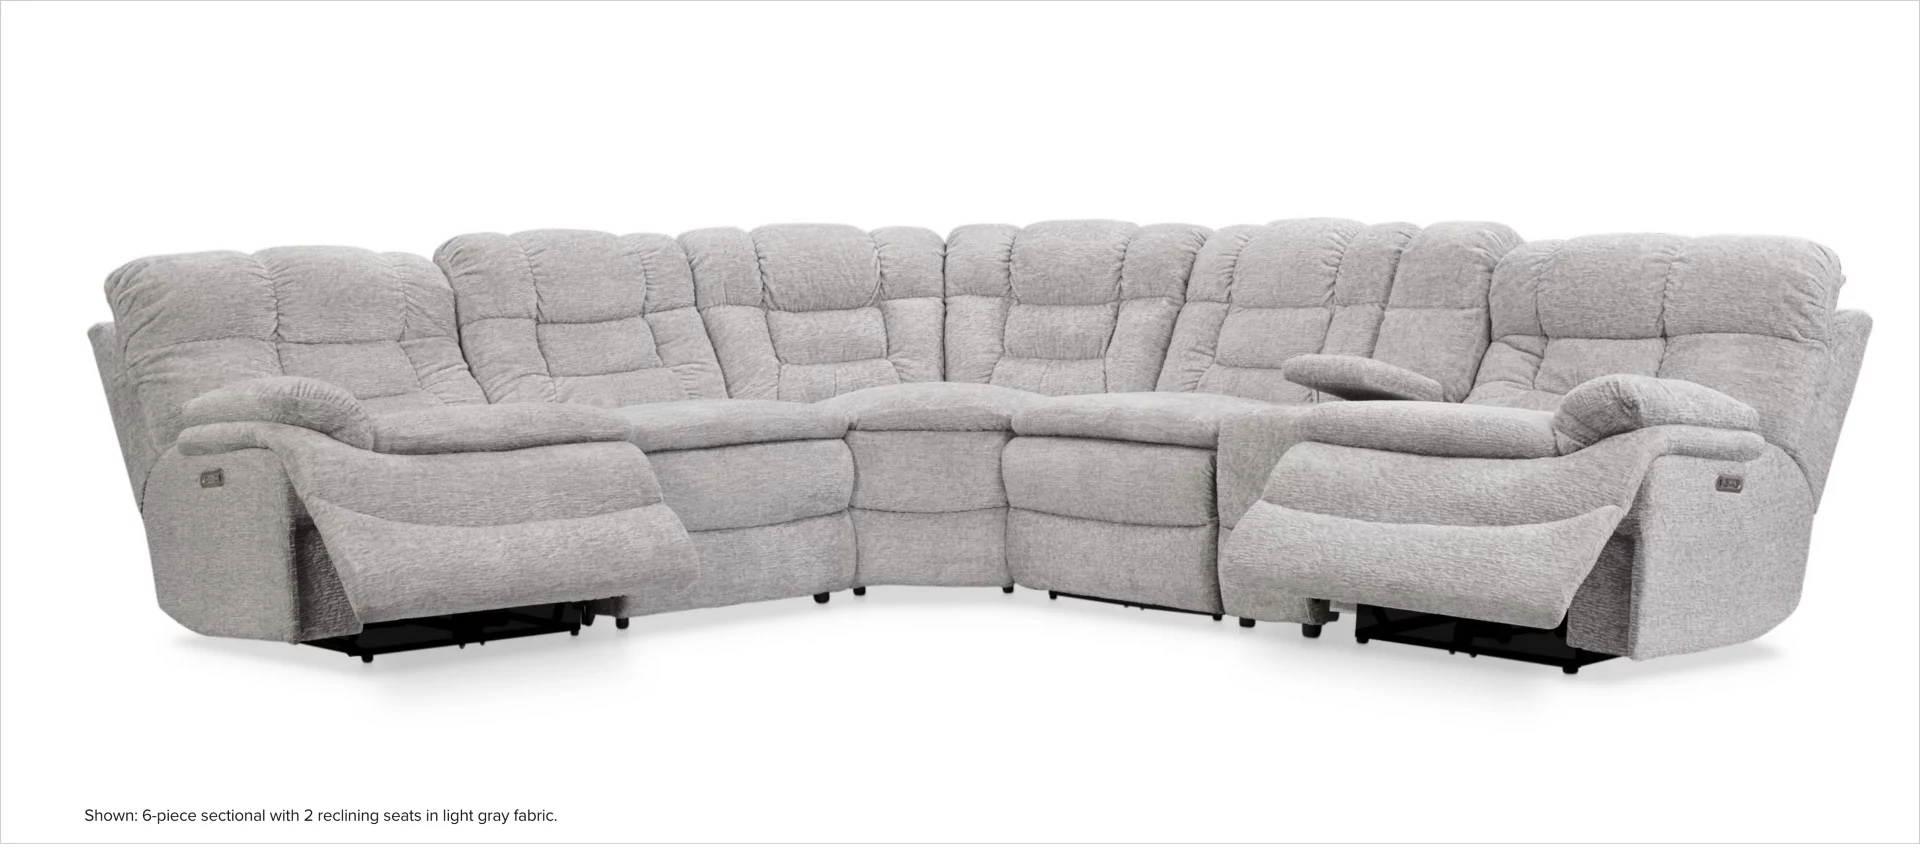 Big Softie 6-piece sectional with 3 reclining seats in light gray fabric.